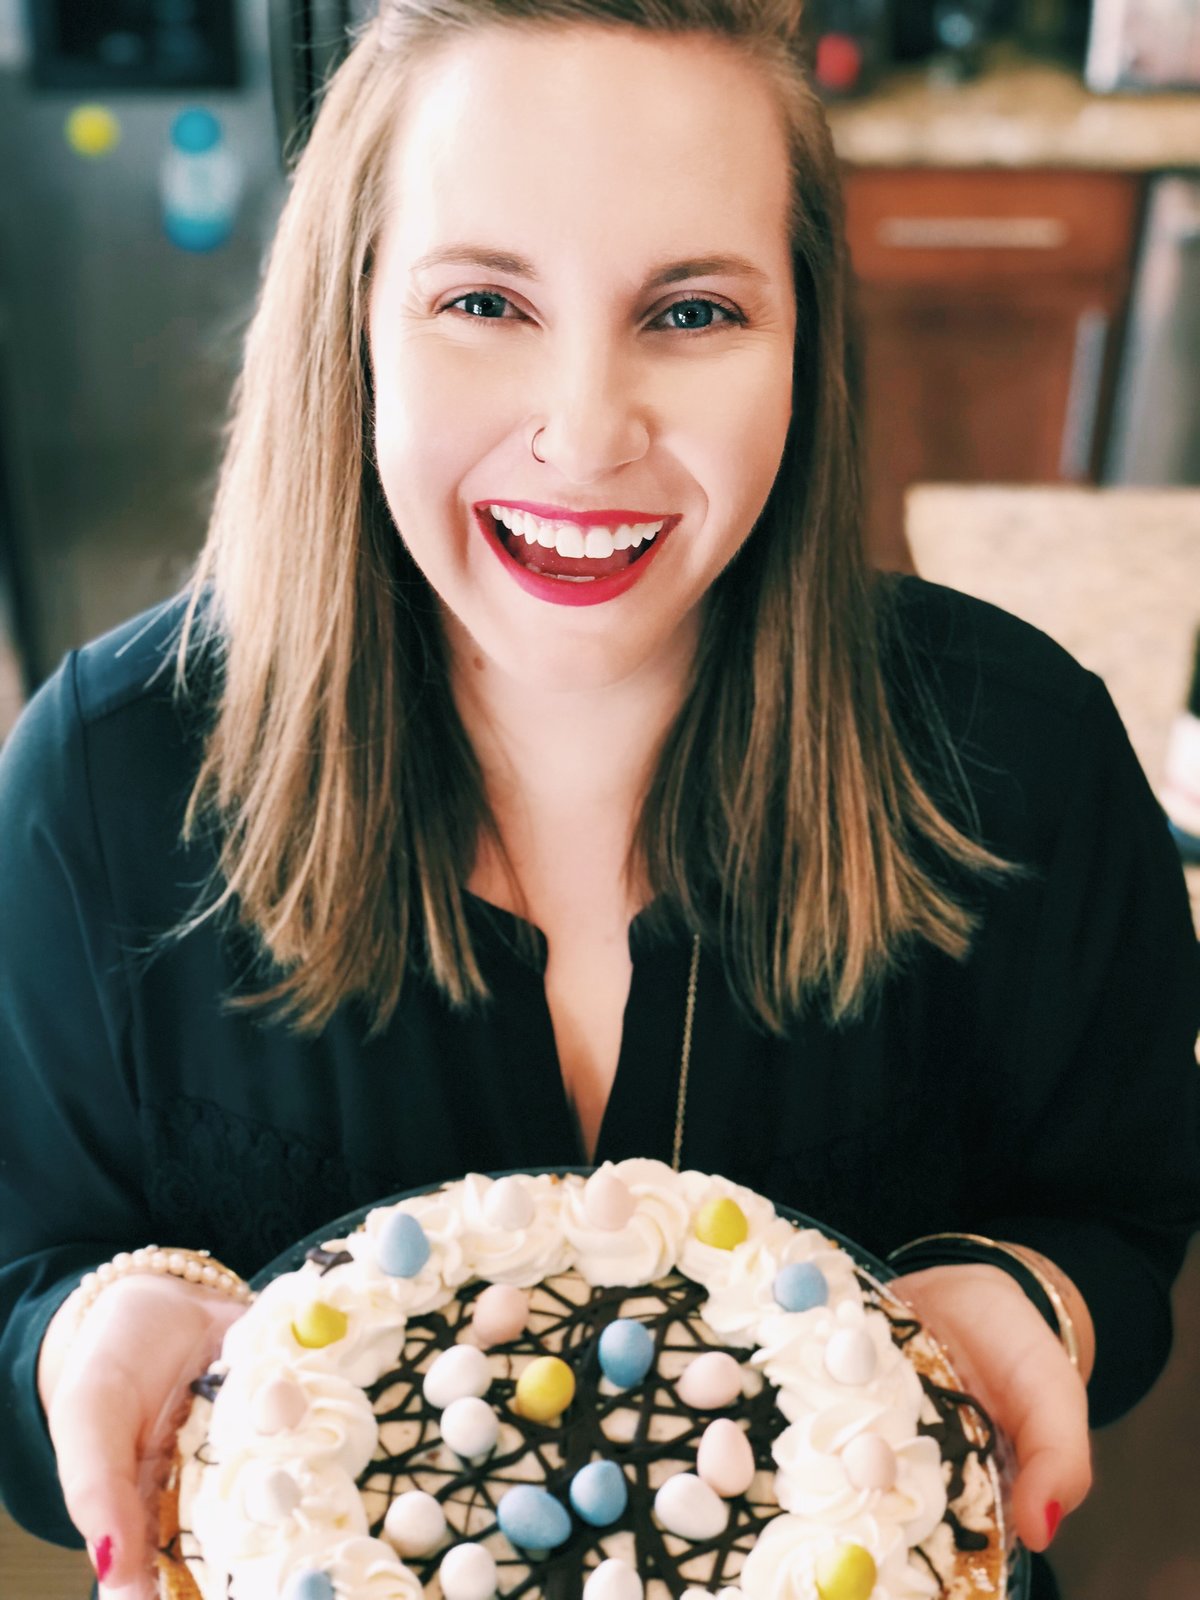 A girl holding a cake and smiling at the camera